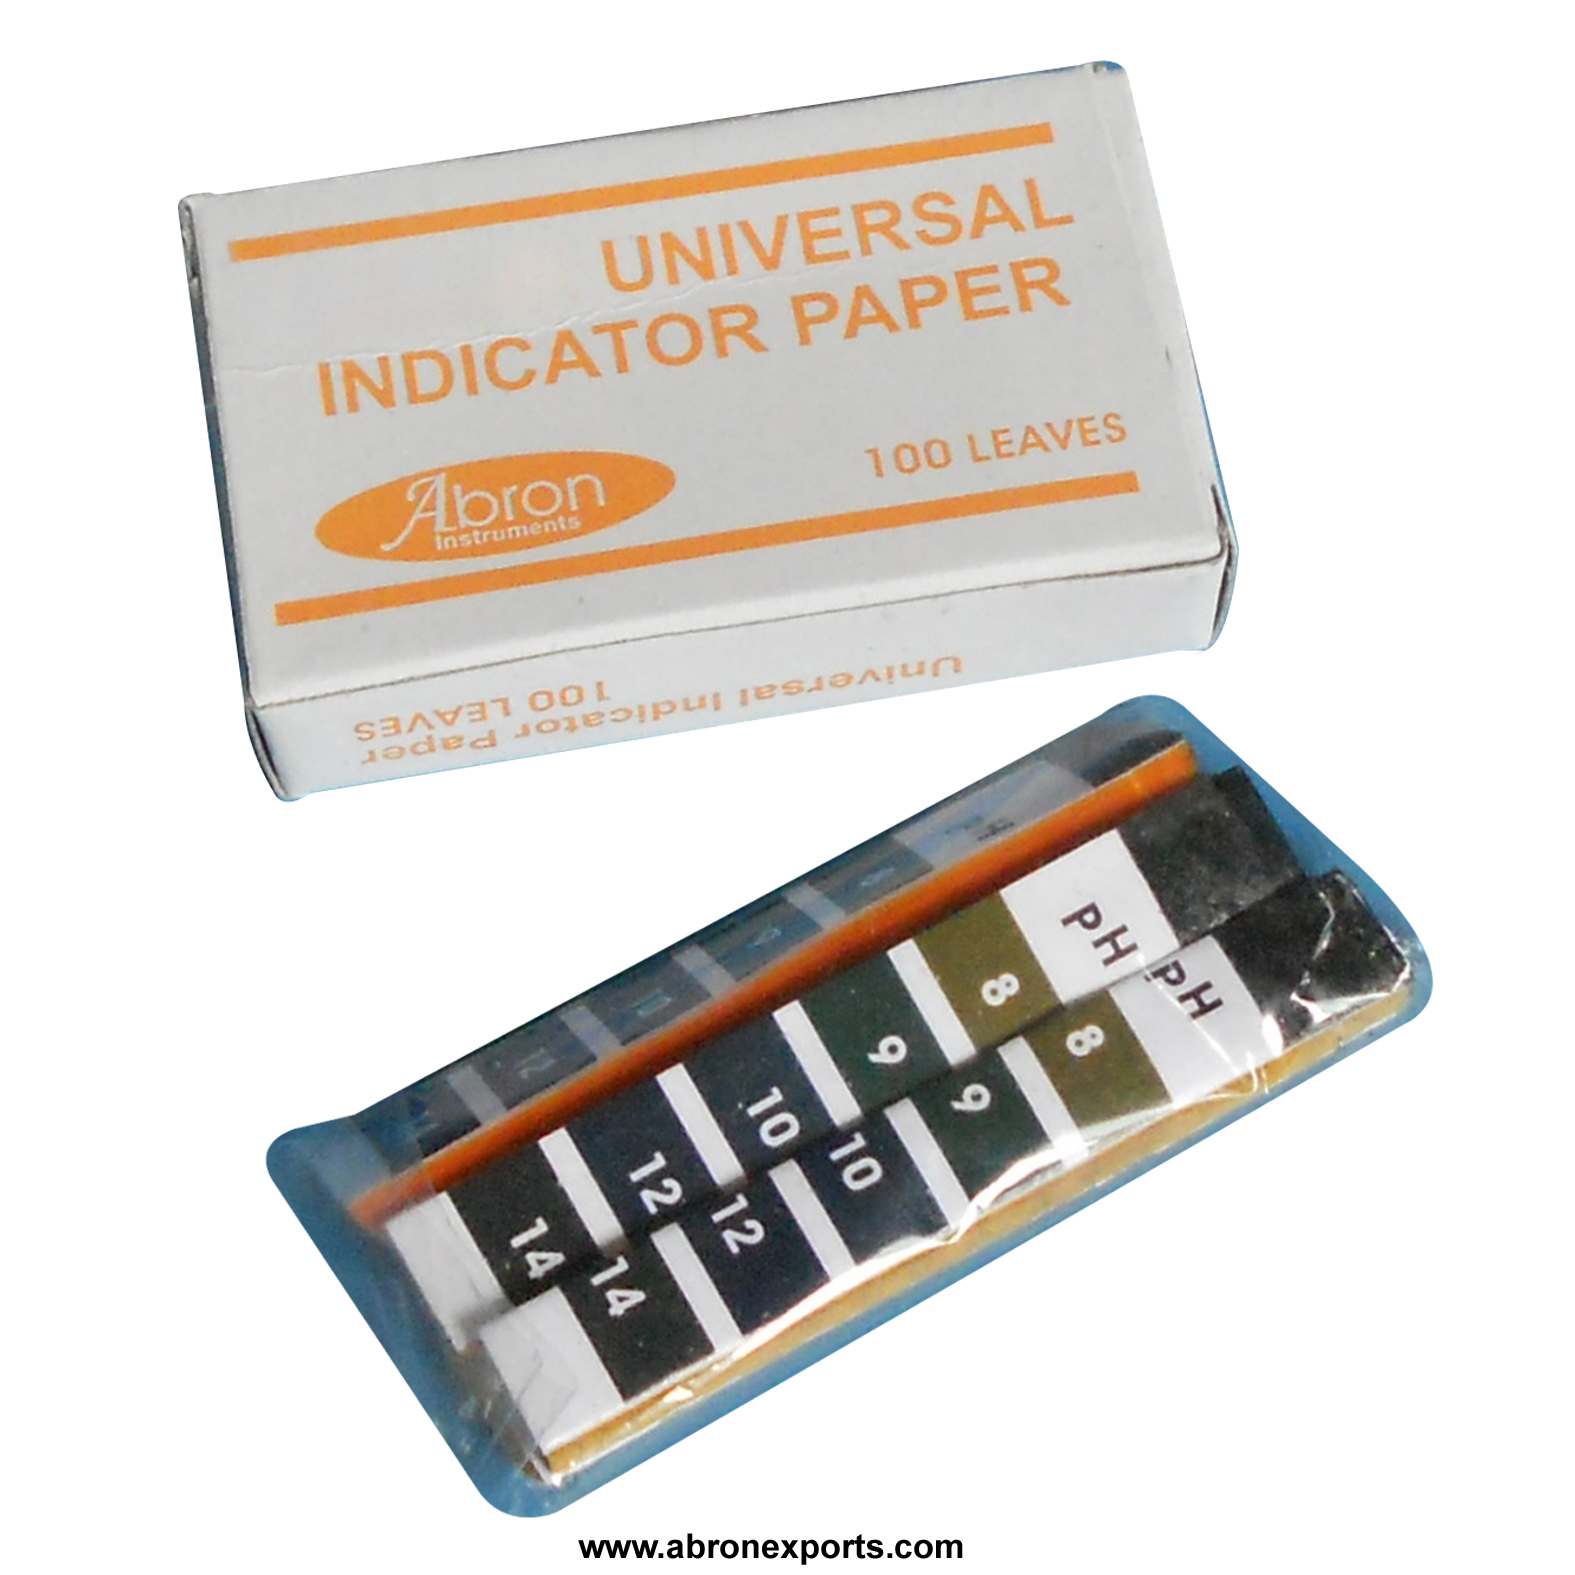 Indicator papers 6.4-8.0 LR 1bx 100 lvs abron IP-1102